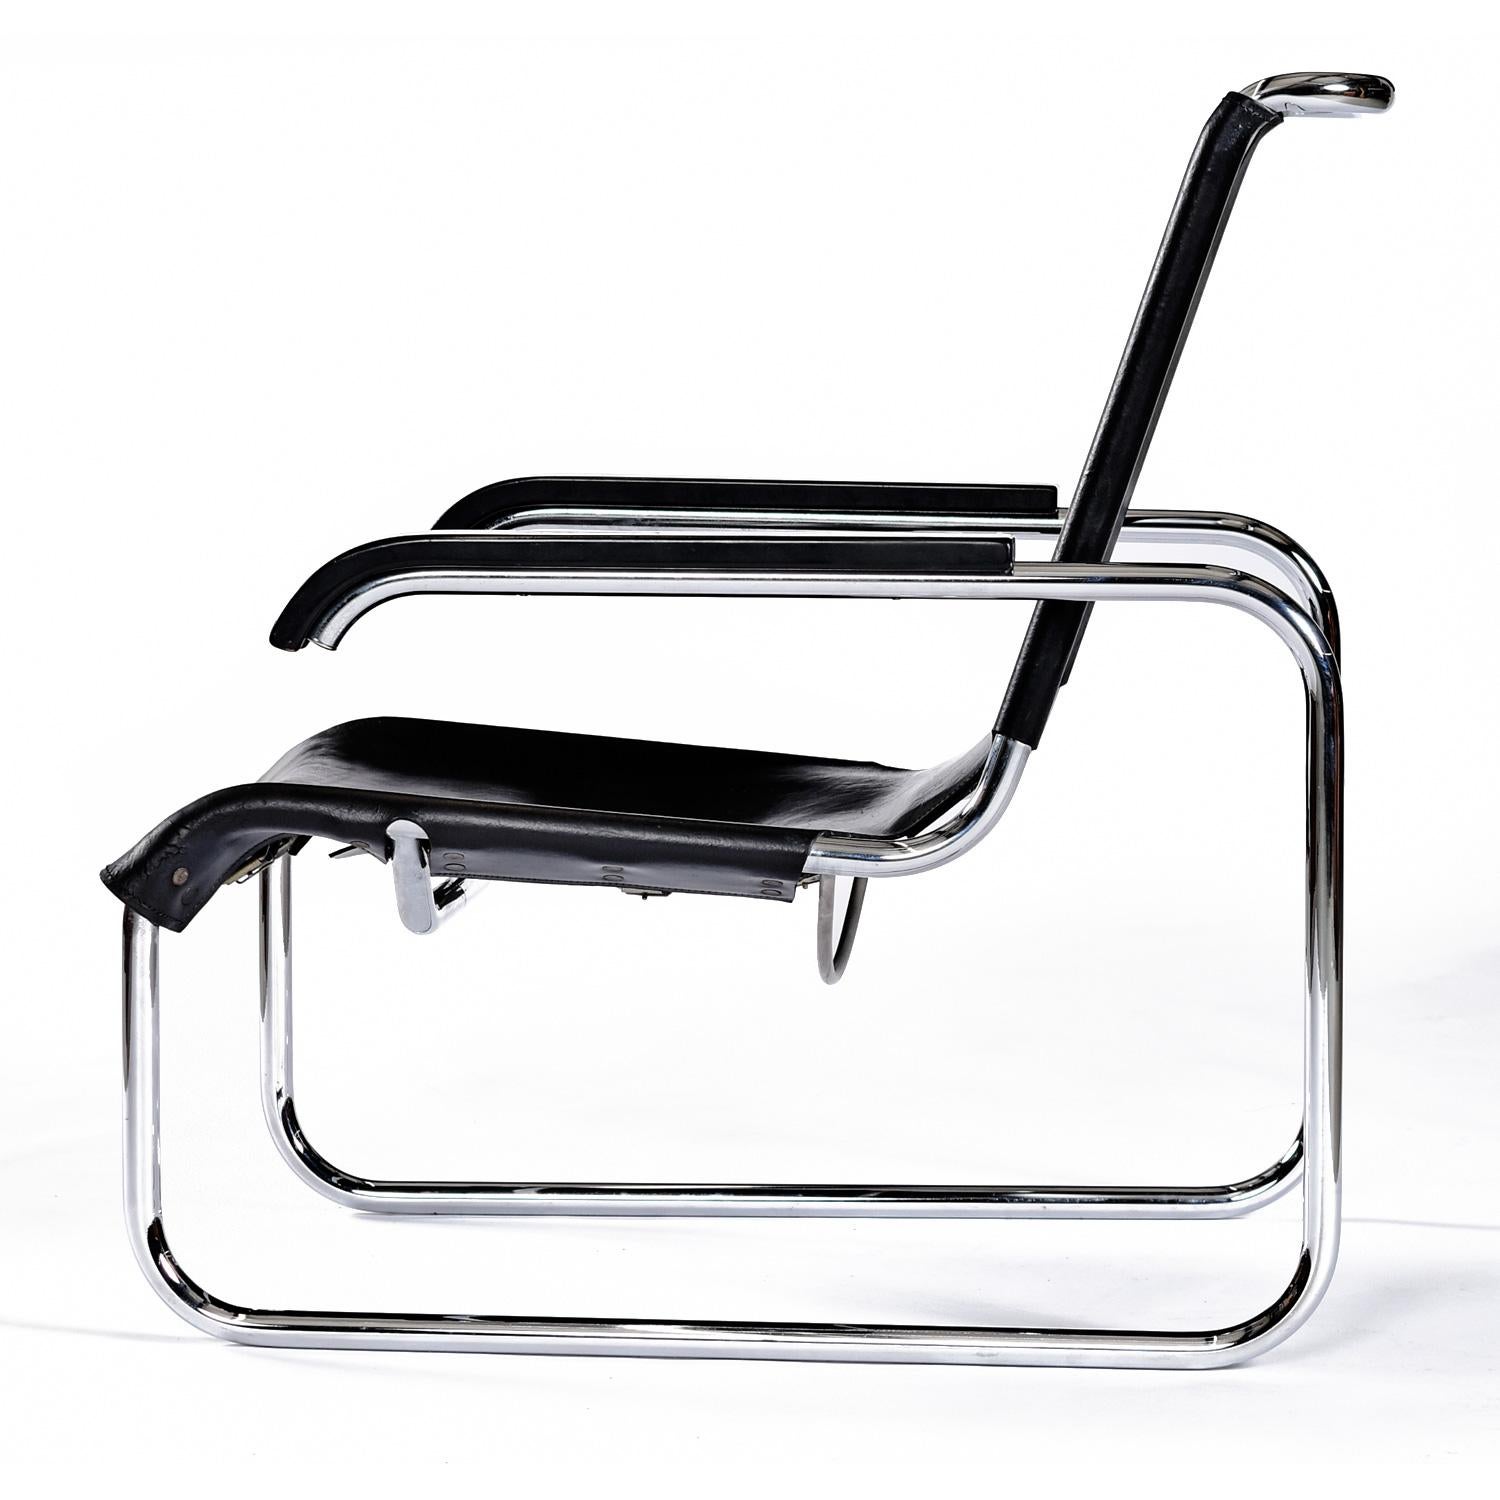 Cuir Marcel Breuer For Thonet B35 Cantilever Leather Sling Lounge Chairs Set of 2 en vente